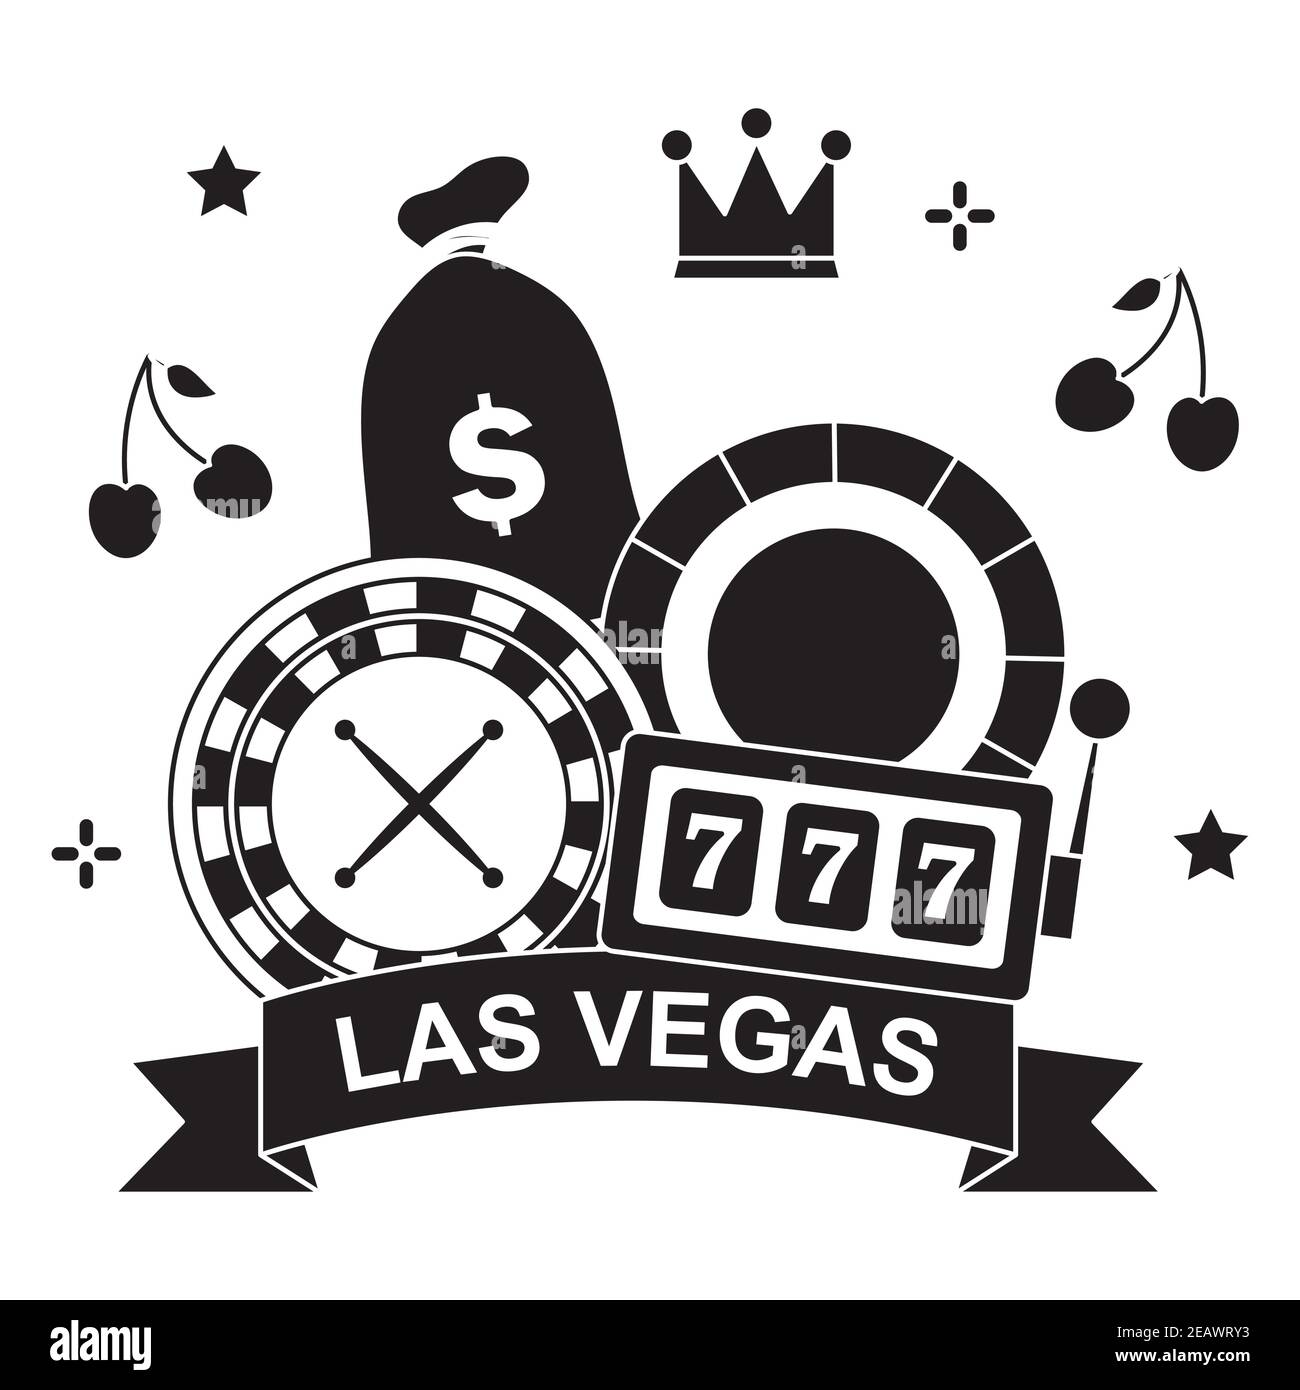 las vegas design with casino related icons over white background ...